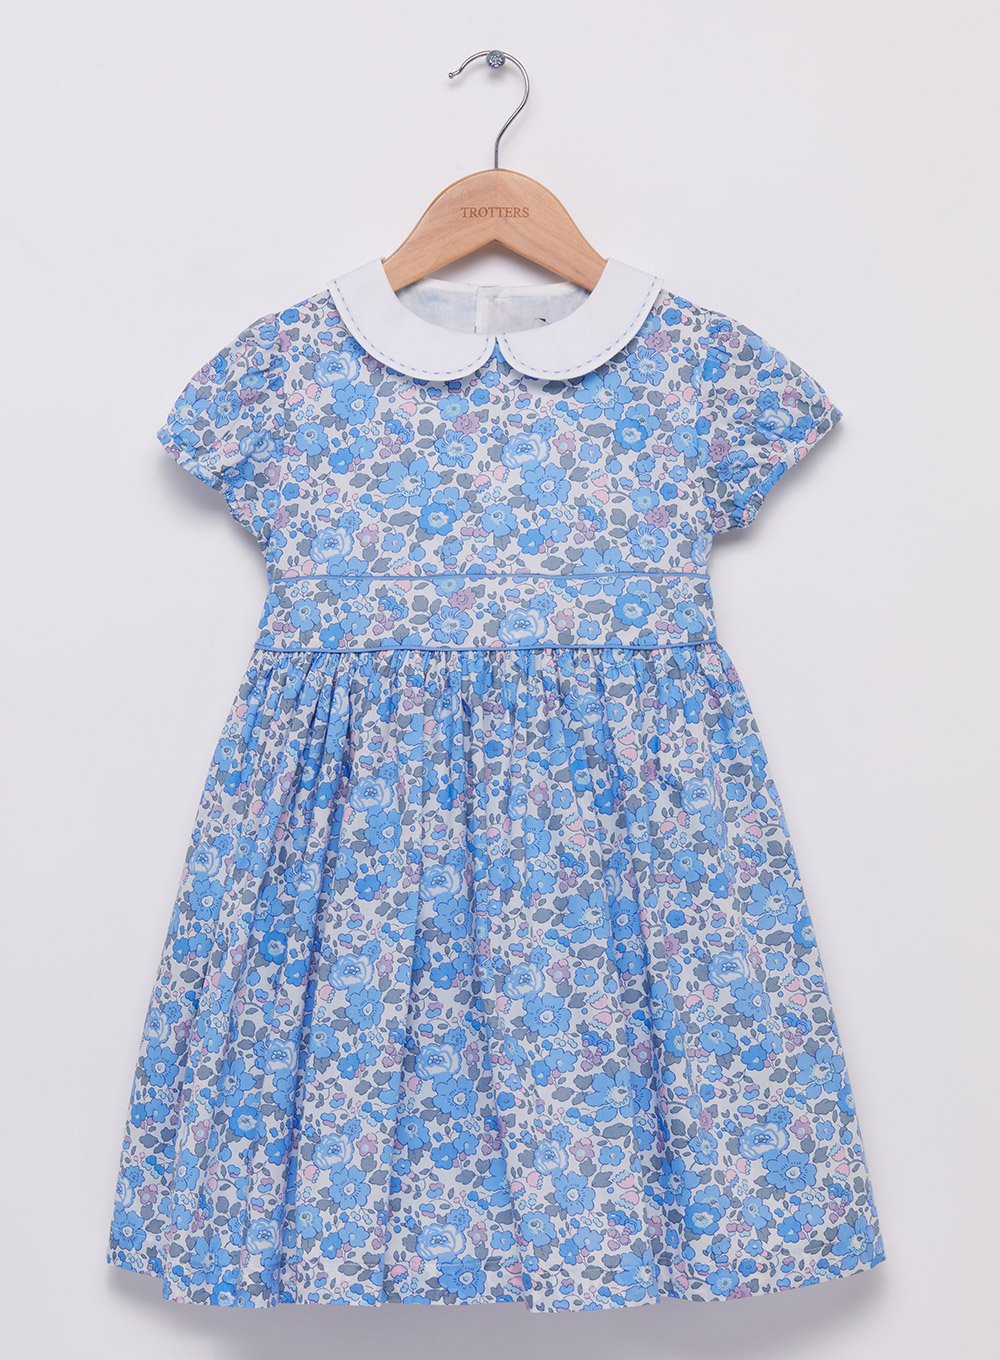 Lily Rose 'Betsy' Dress from Trotters